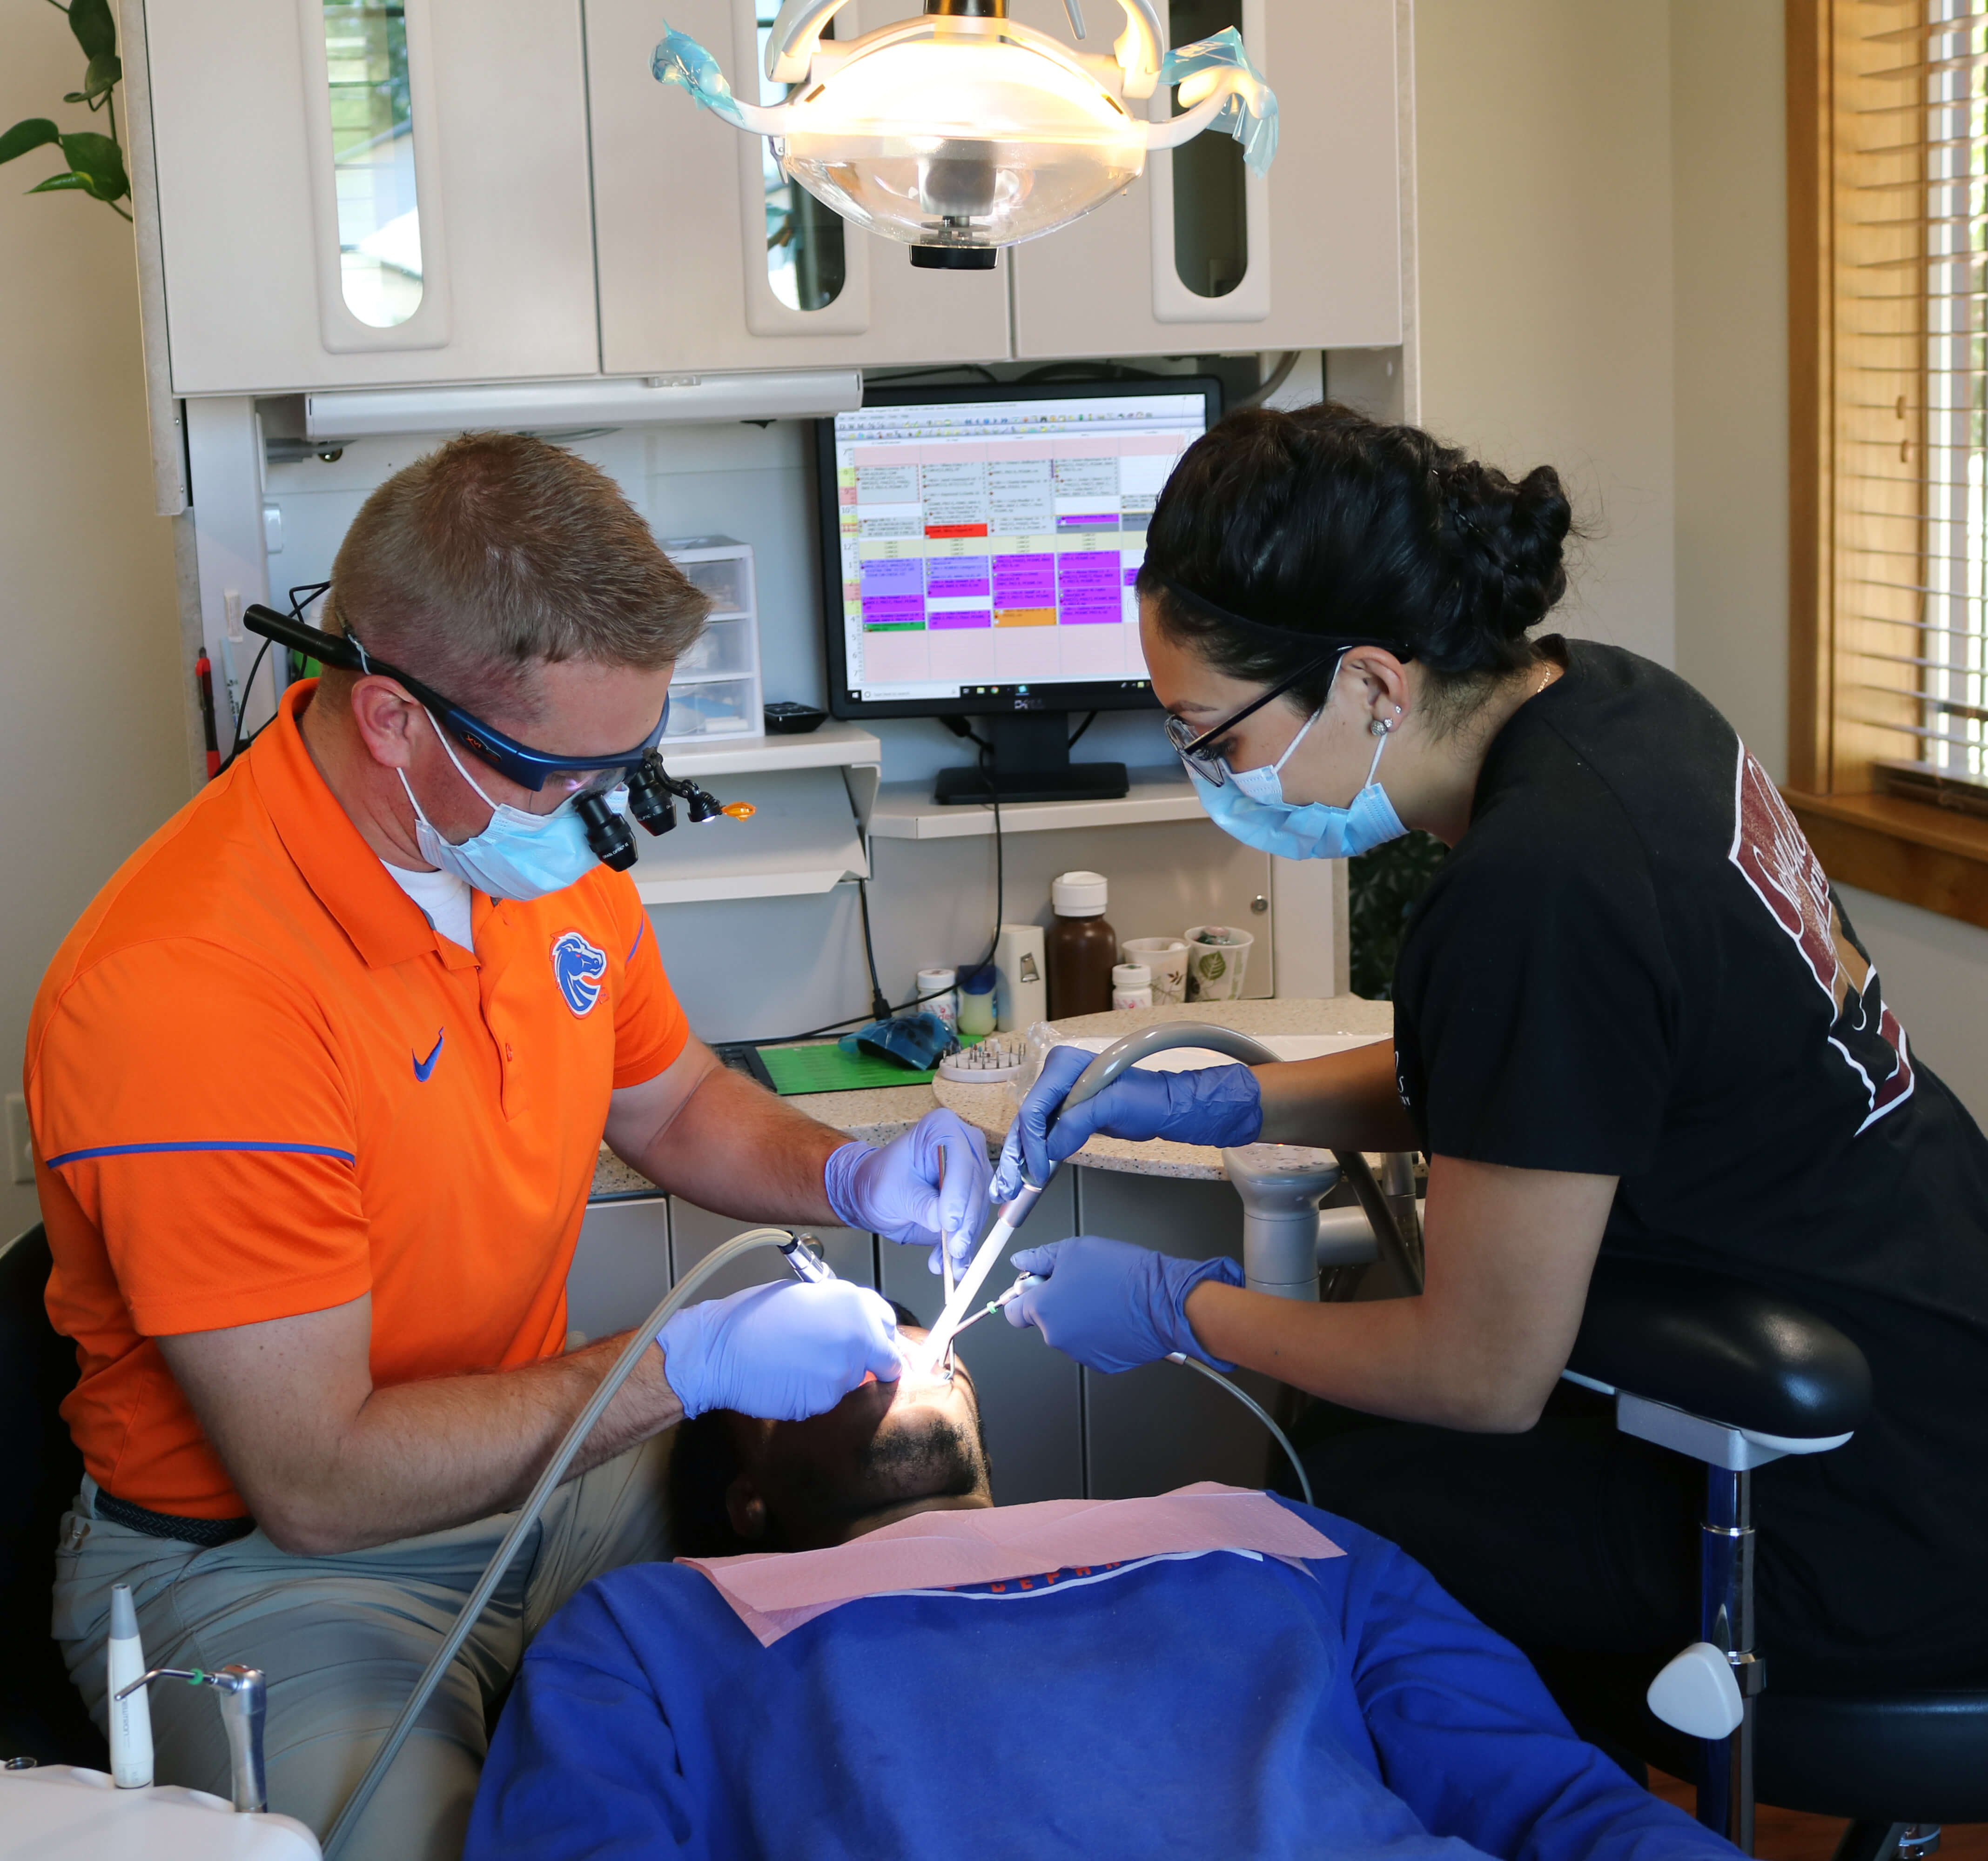 dentist and dental assistant